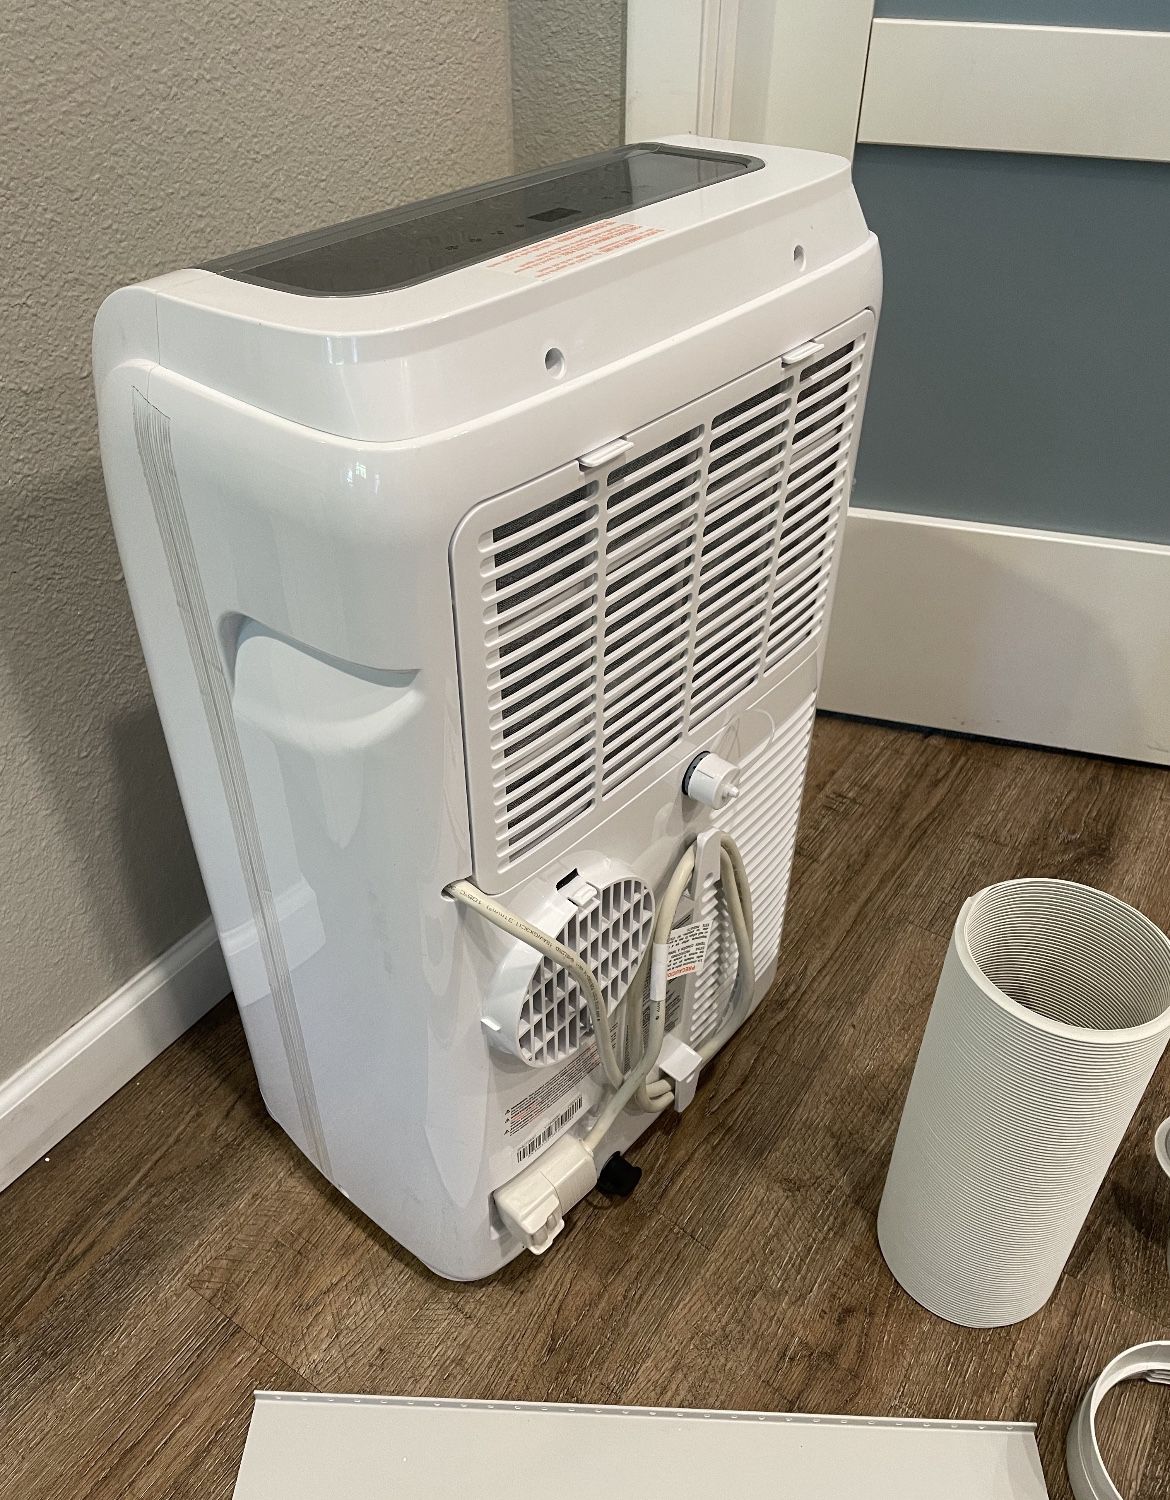 BRAND NEW & SEALED BLACK+DECKER 8,000 BTU Portable Air Conditioner up to  350 Sq. with Remote Control, White for Sale in Seattle, WA - OfferUp